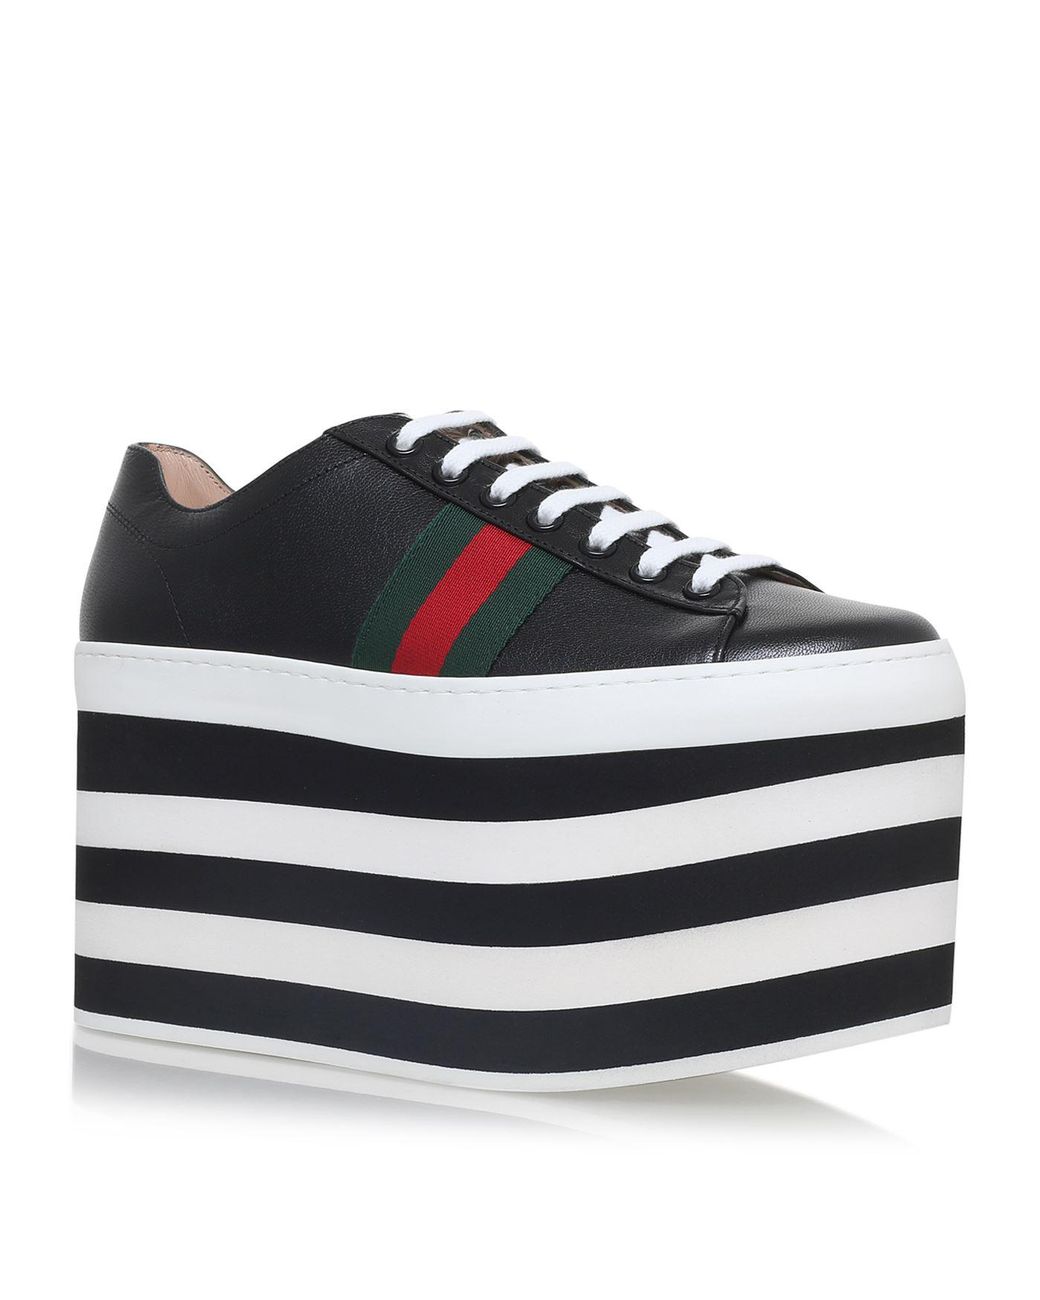 Gucci Peggy Platform Sneakers | Lyst